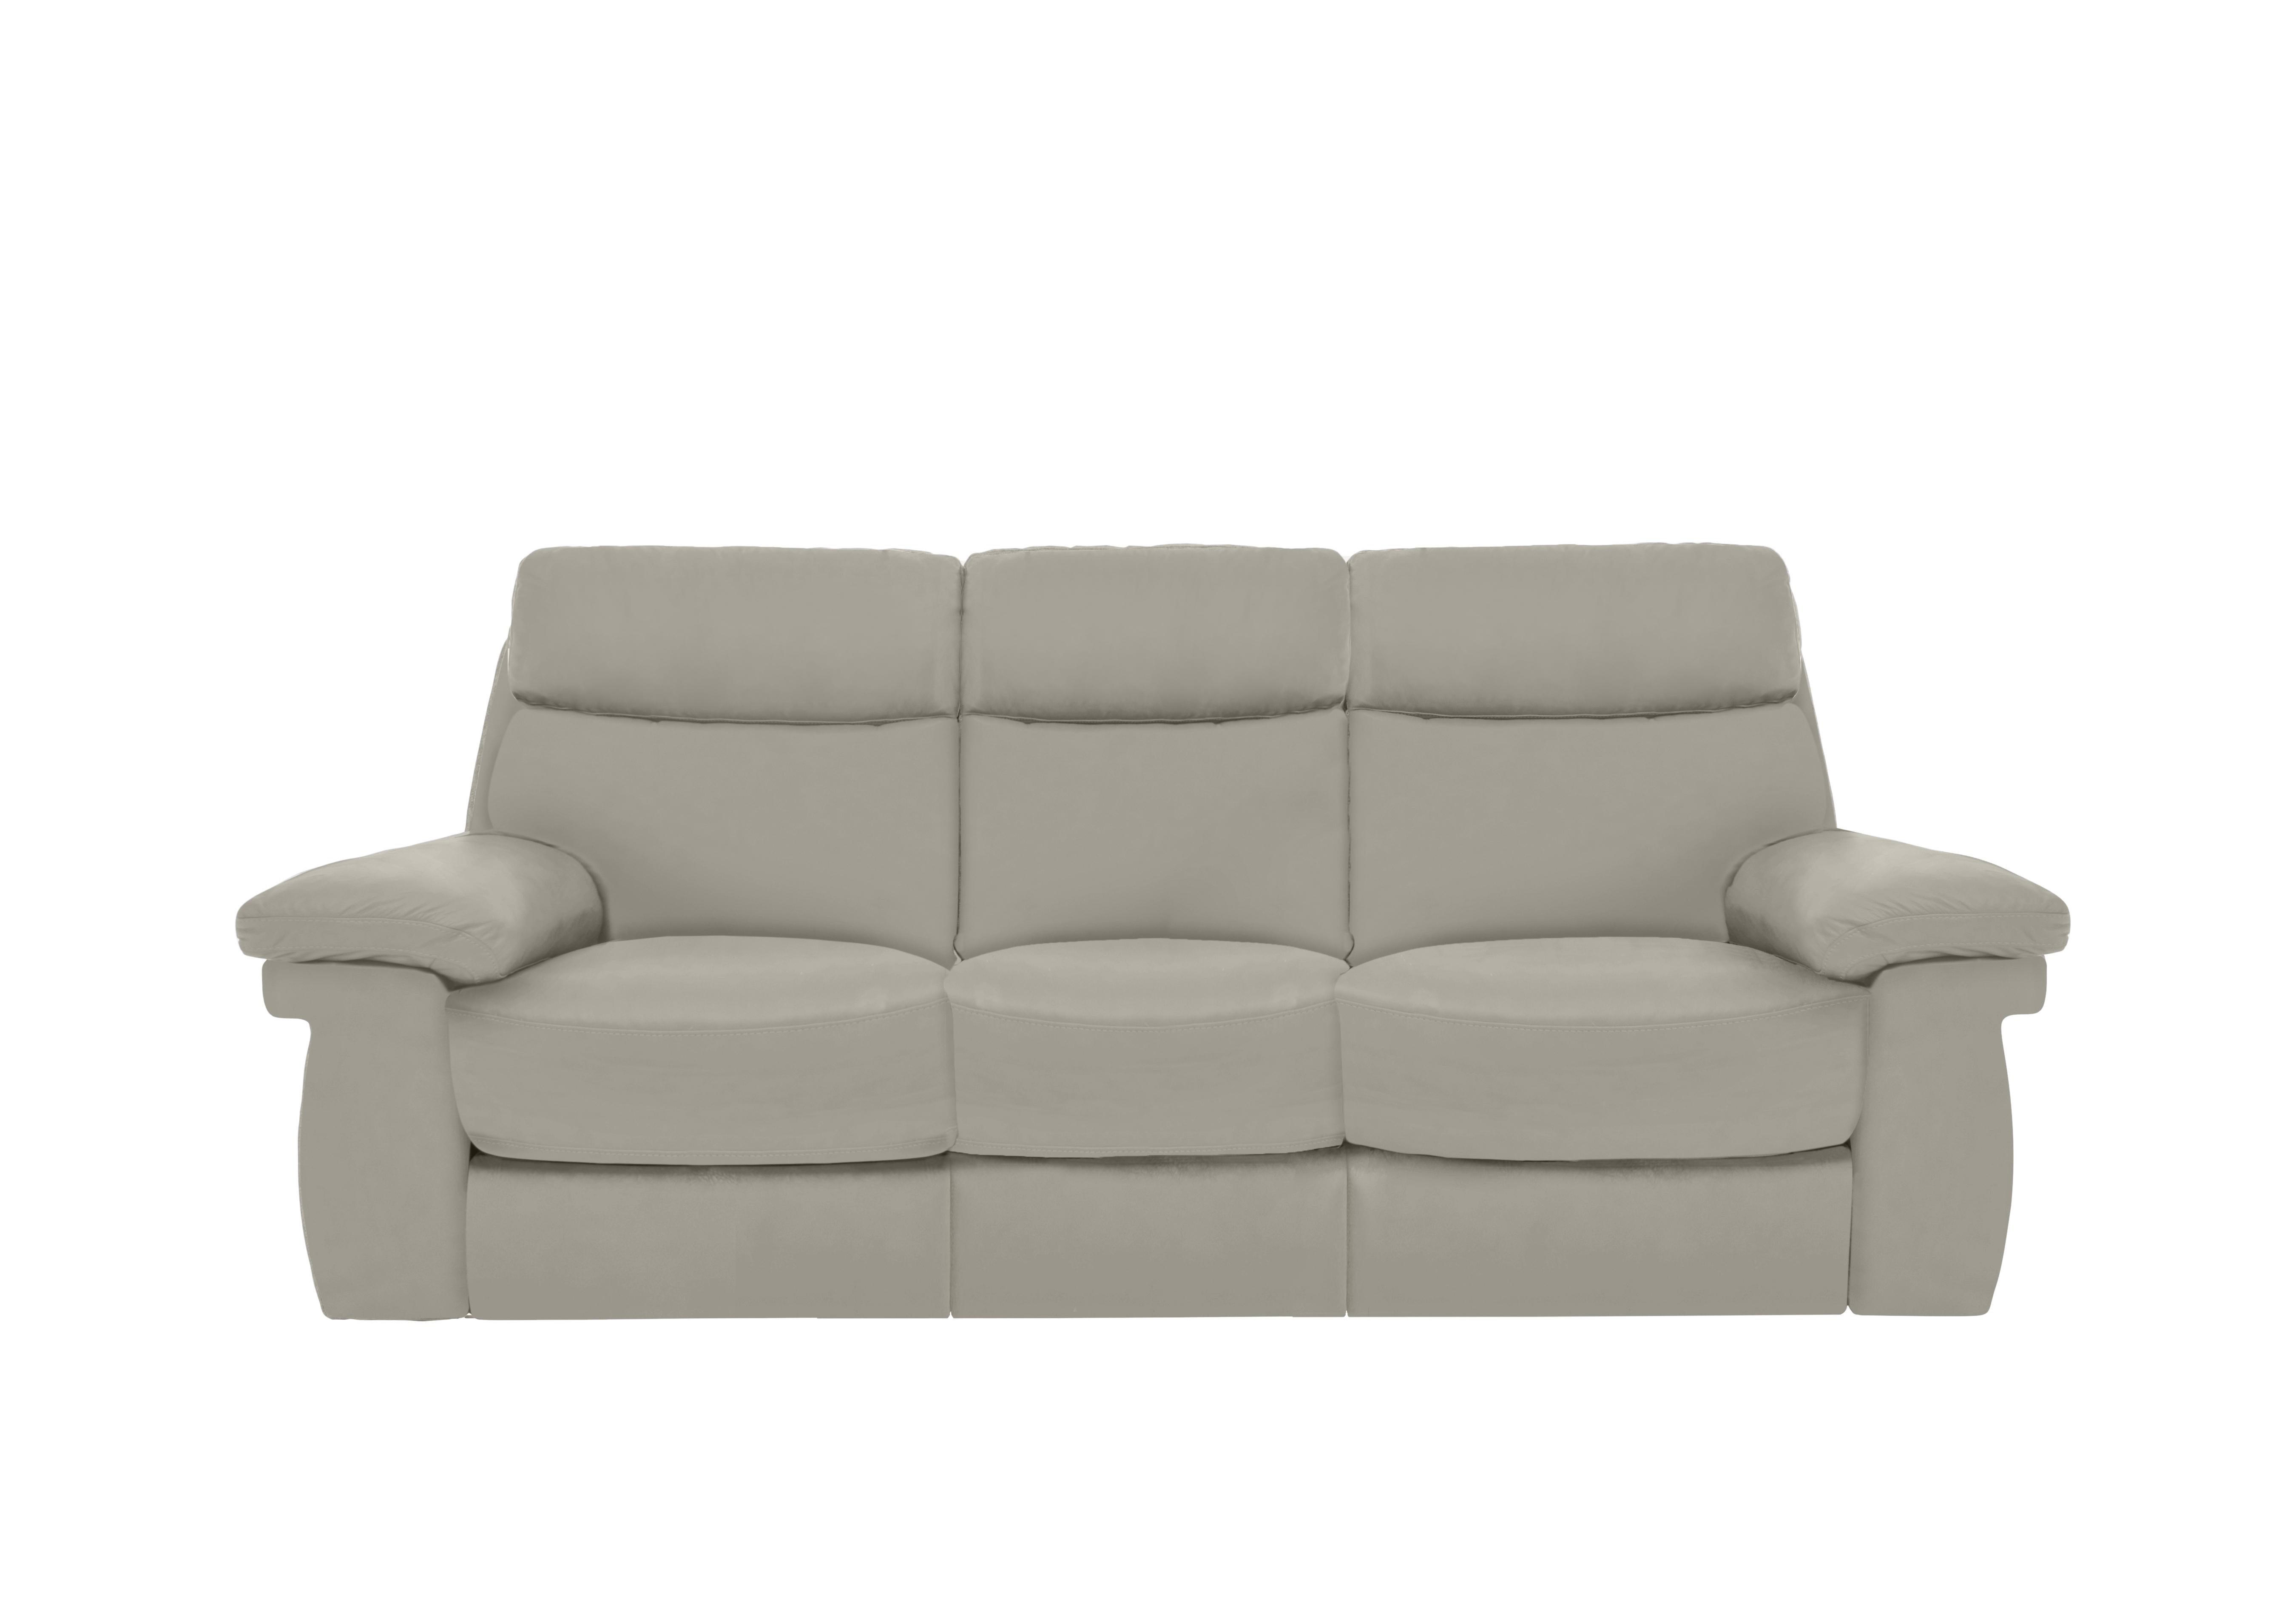 Serene 3 Seater Leather Power Recliner Sofa with Power Headrests in Bx-251e Grey on Furniture Village